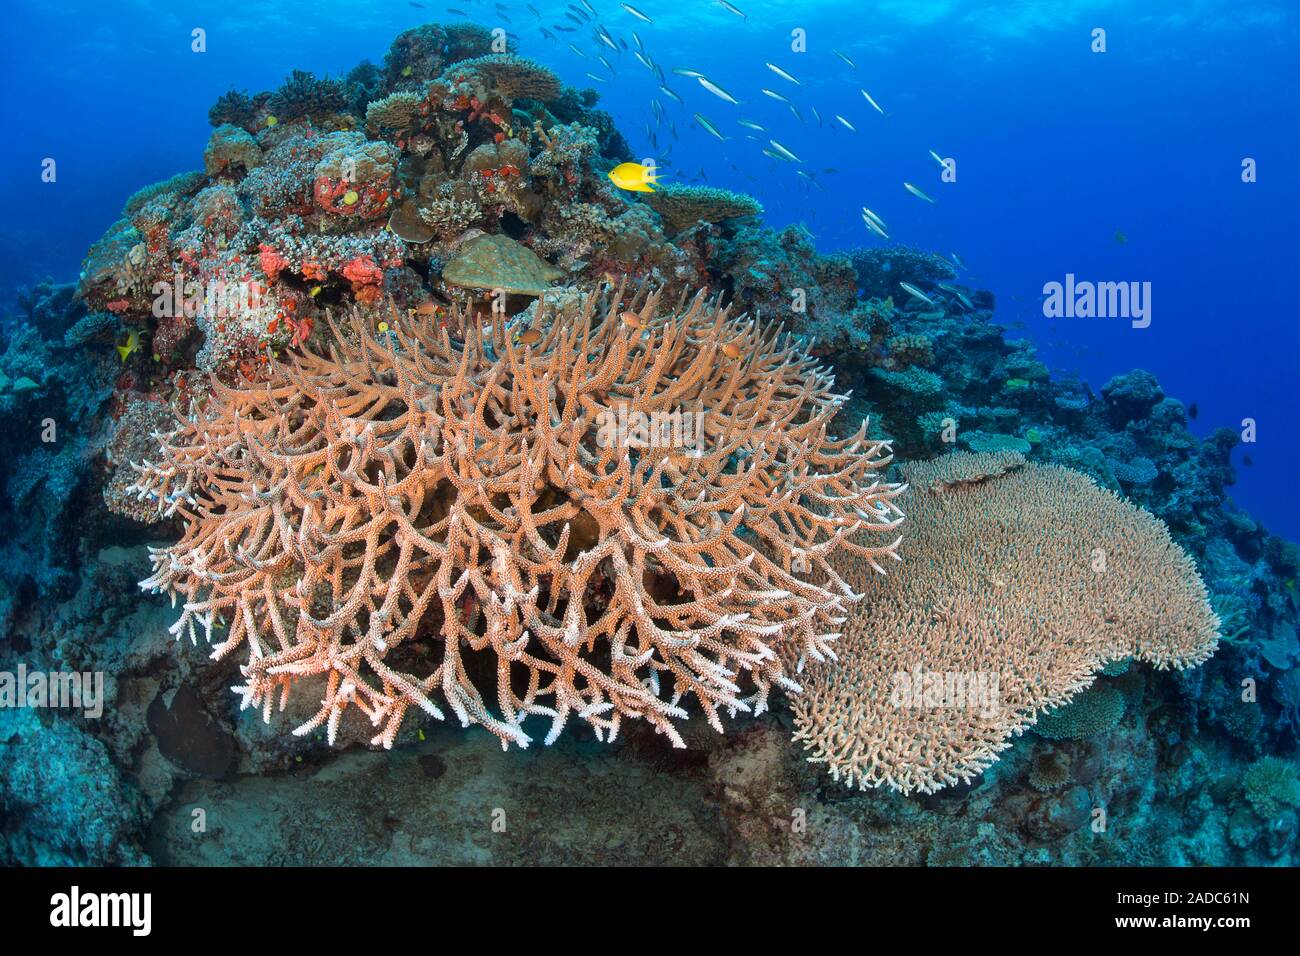 Two impressive stands of hard coral dominate this Fijian reef scene. Stock Photo